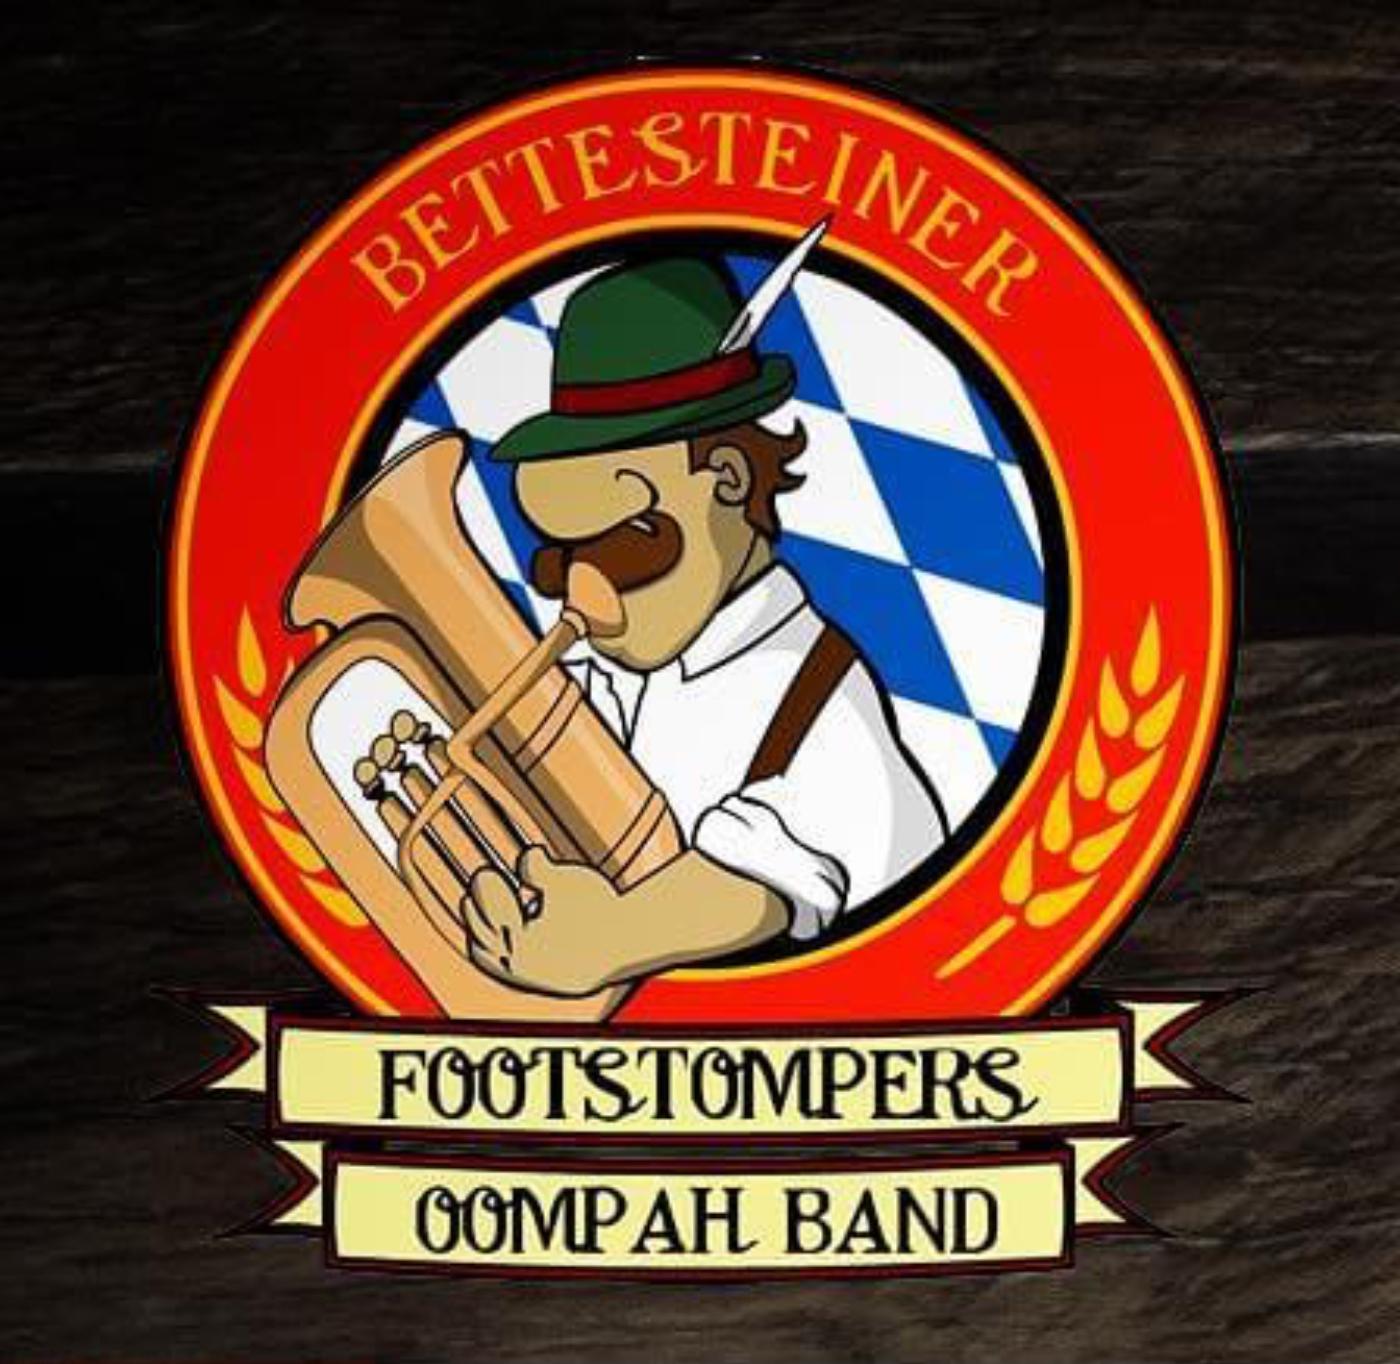 Bettesteiner Footstompers Oompah Band logo showing an animated design of a musician playing a brass instrument.